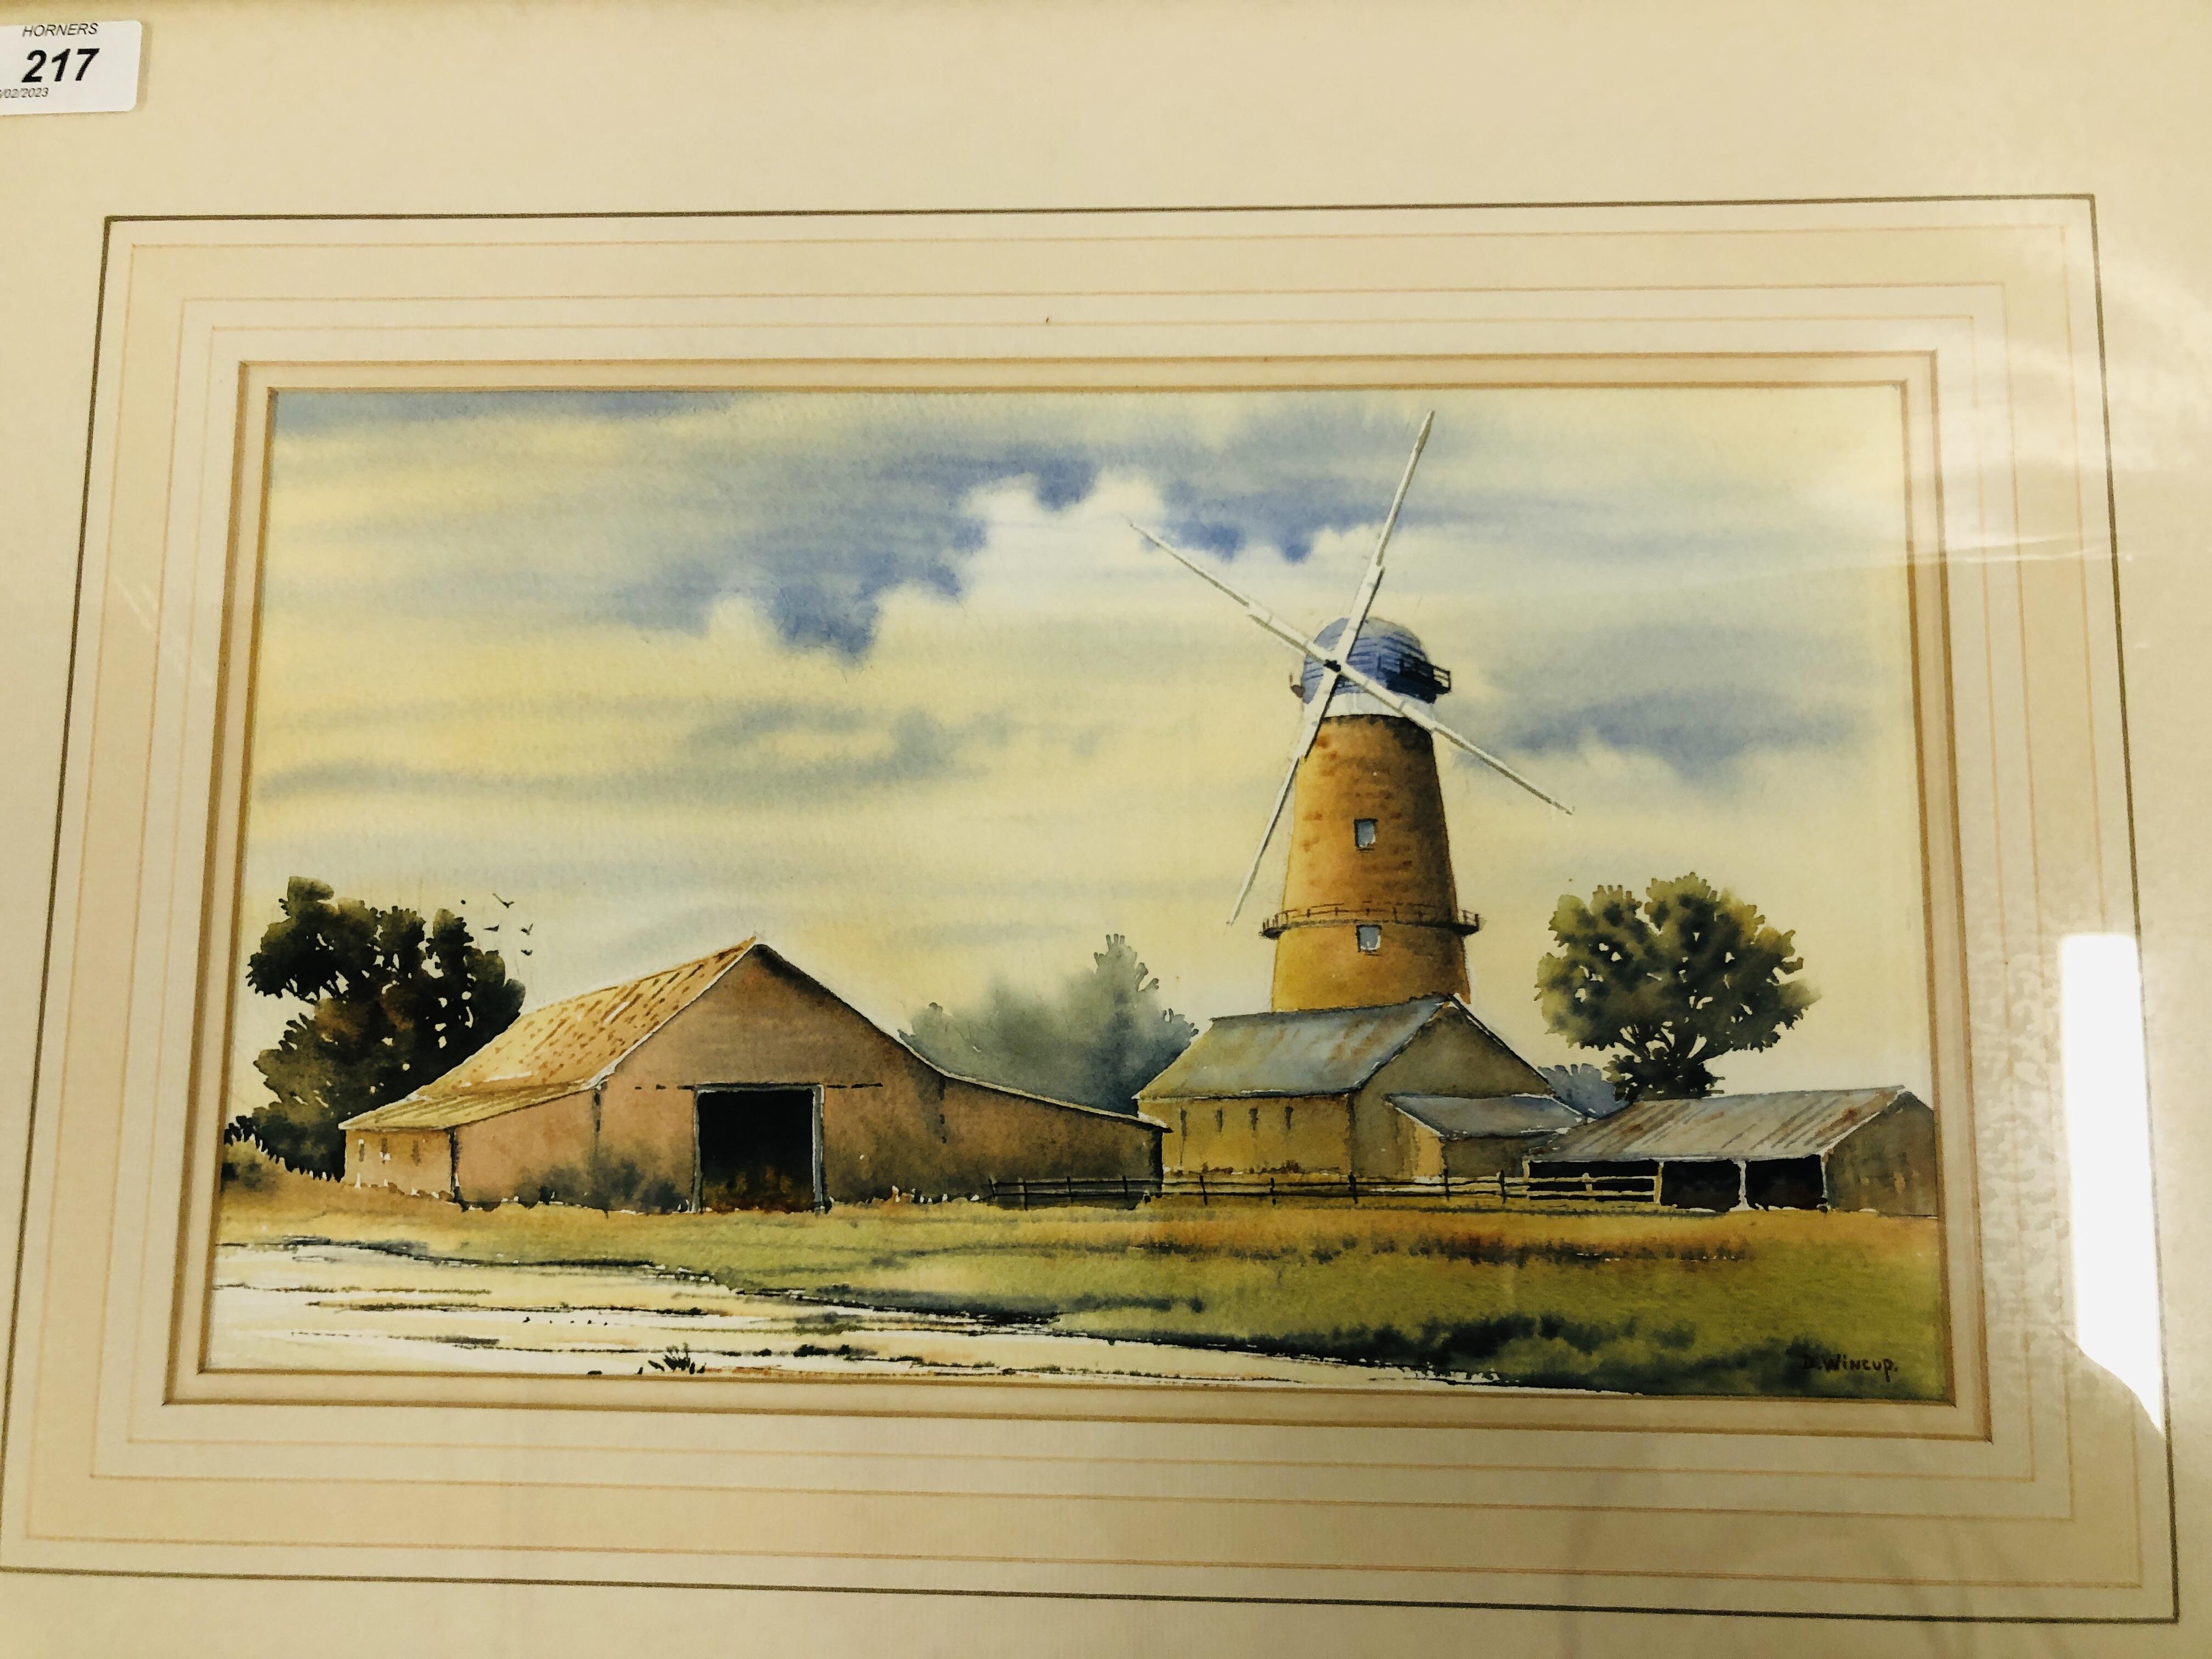 AN ORIGINAL FRAMED WATERCOLOUR "SUTTON MILL" BEARING SIGNATURE D. WINCUP - W 33.5CM. X H 20CM. - Image 2 of 5